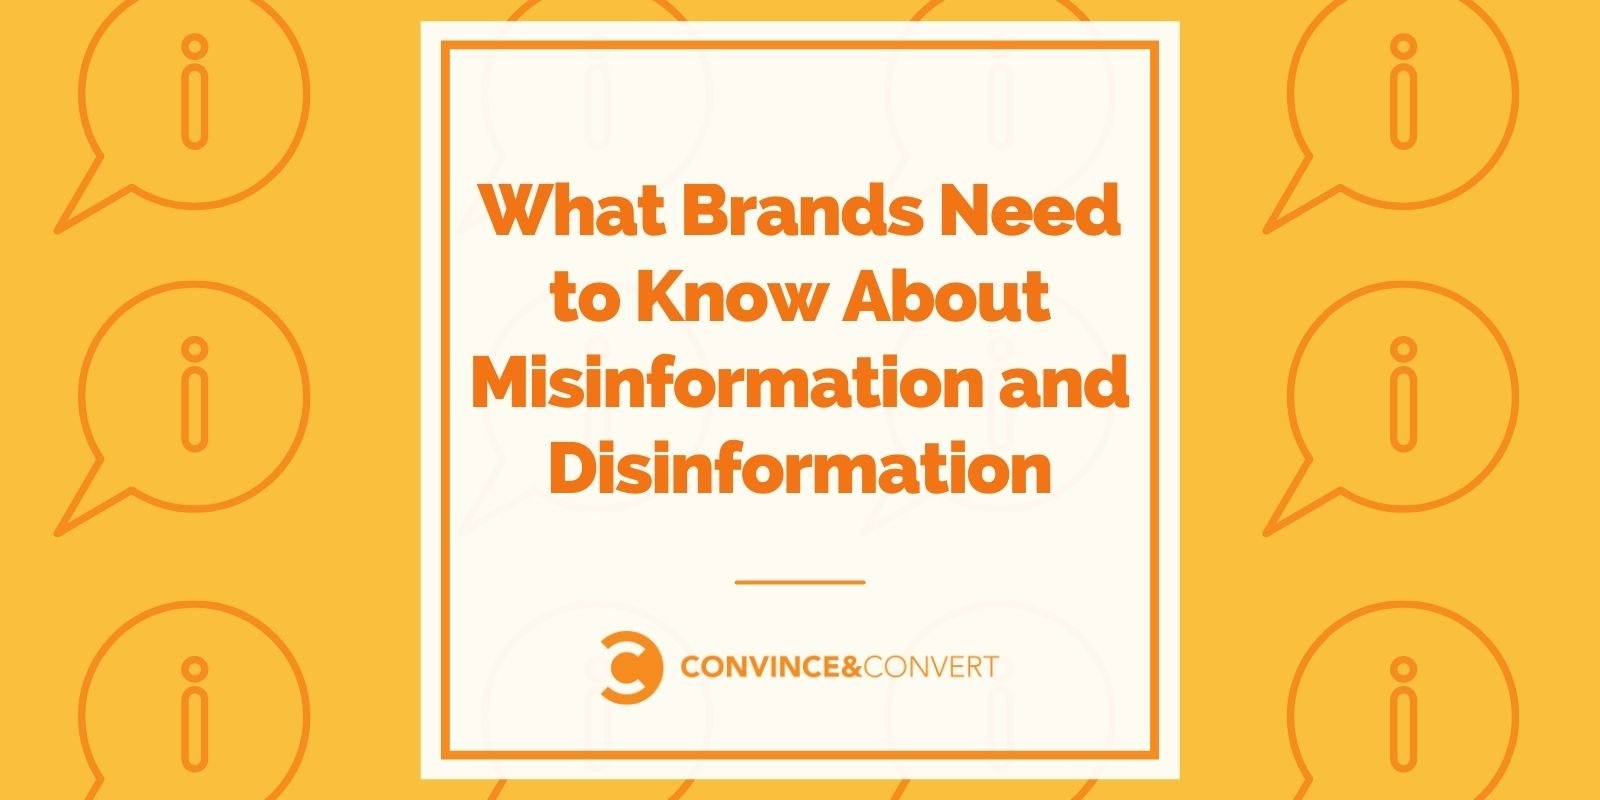 What Brands Have to Know About Misinformation and Disinformation